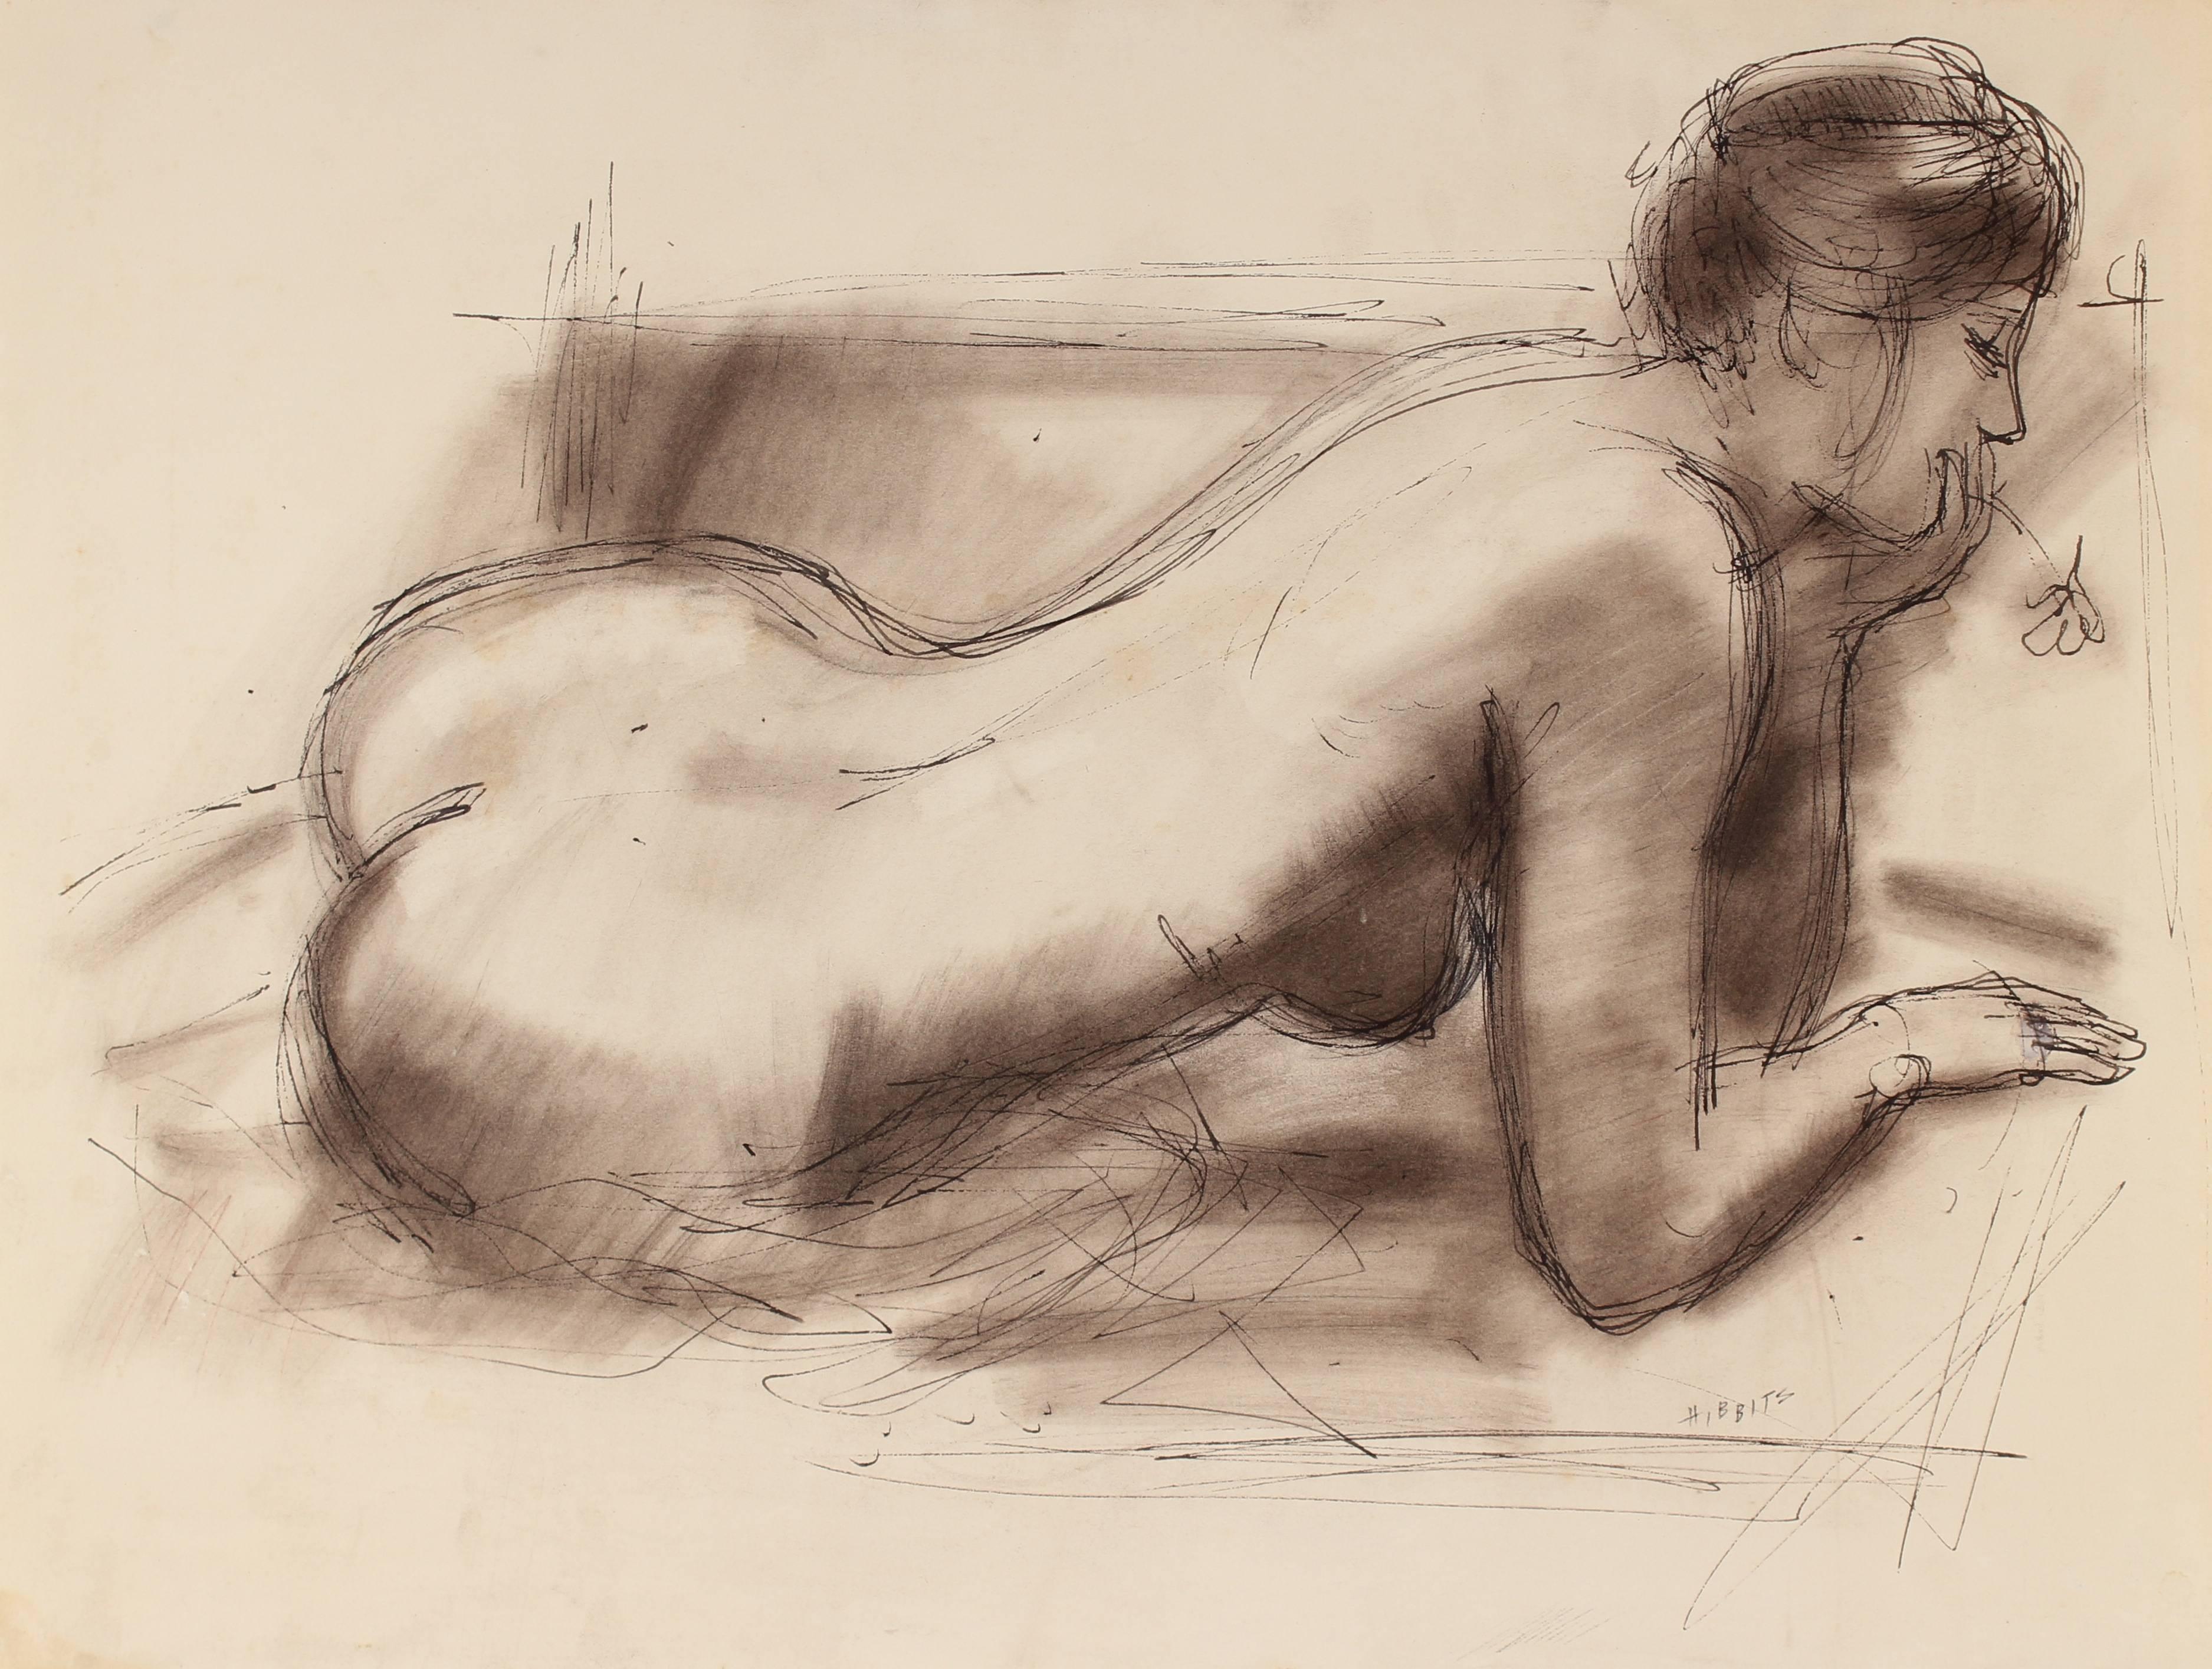 Monochromatic Female Nude in Charcoal, Mid 20th Century - Art by Forrest Hibbits